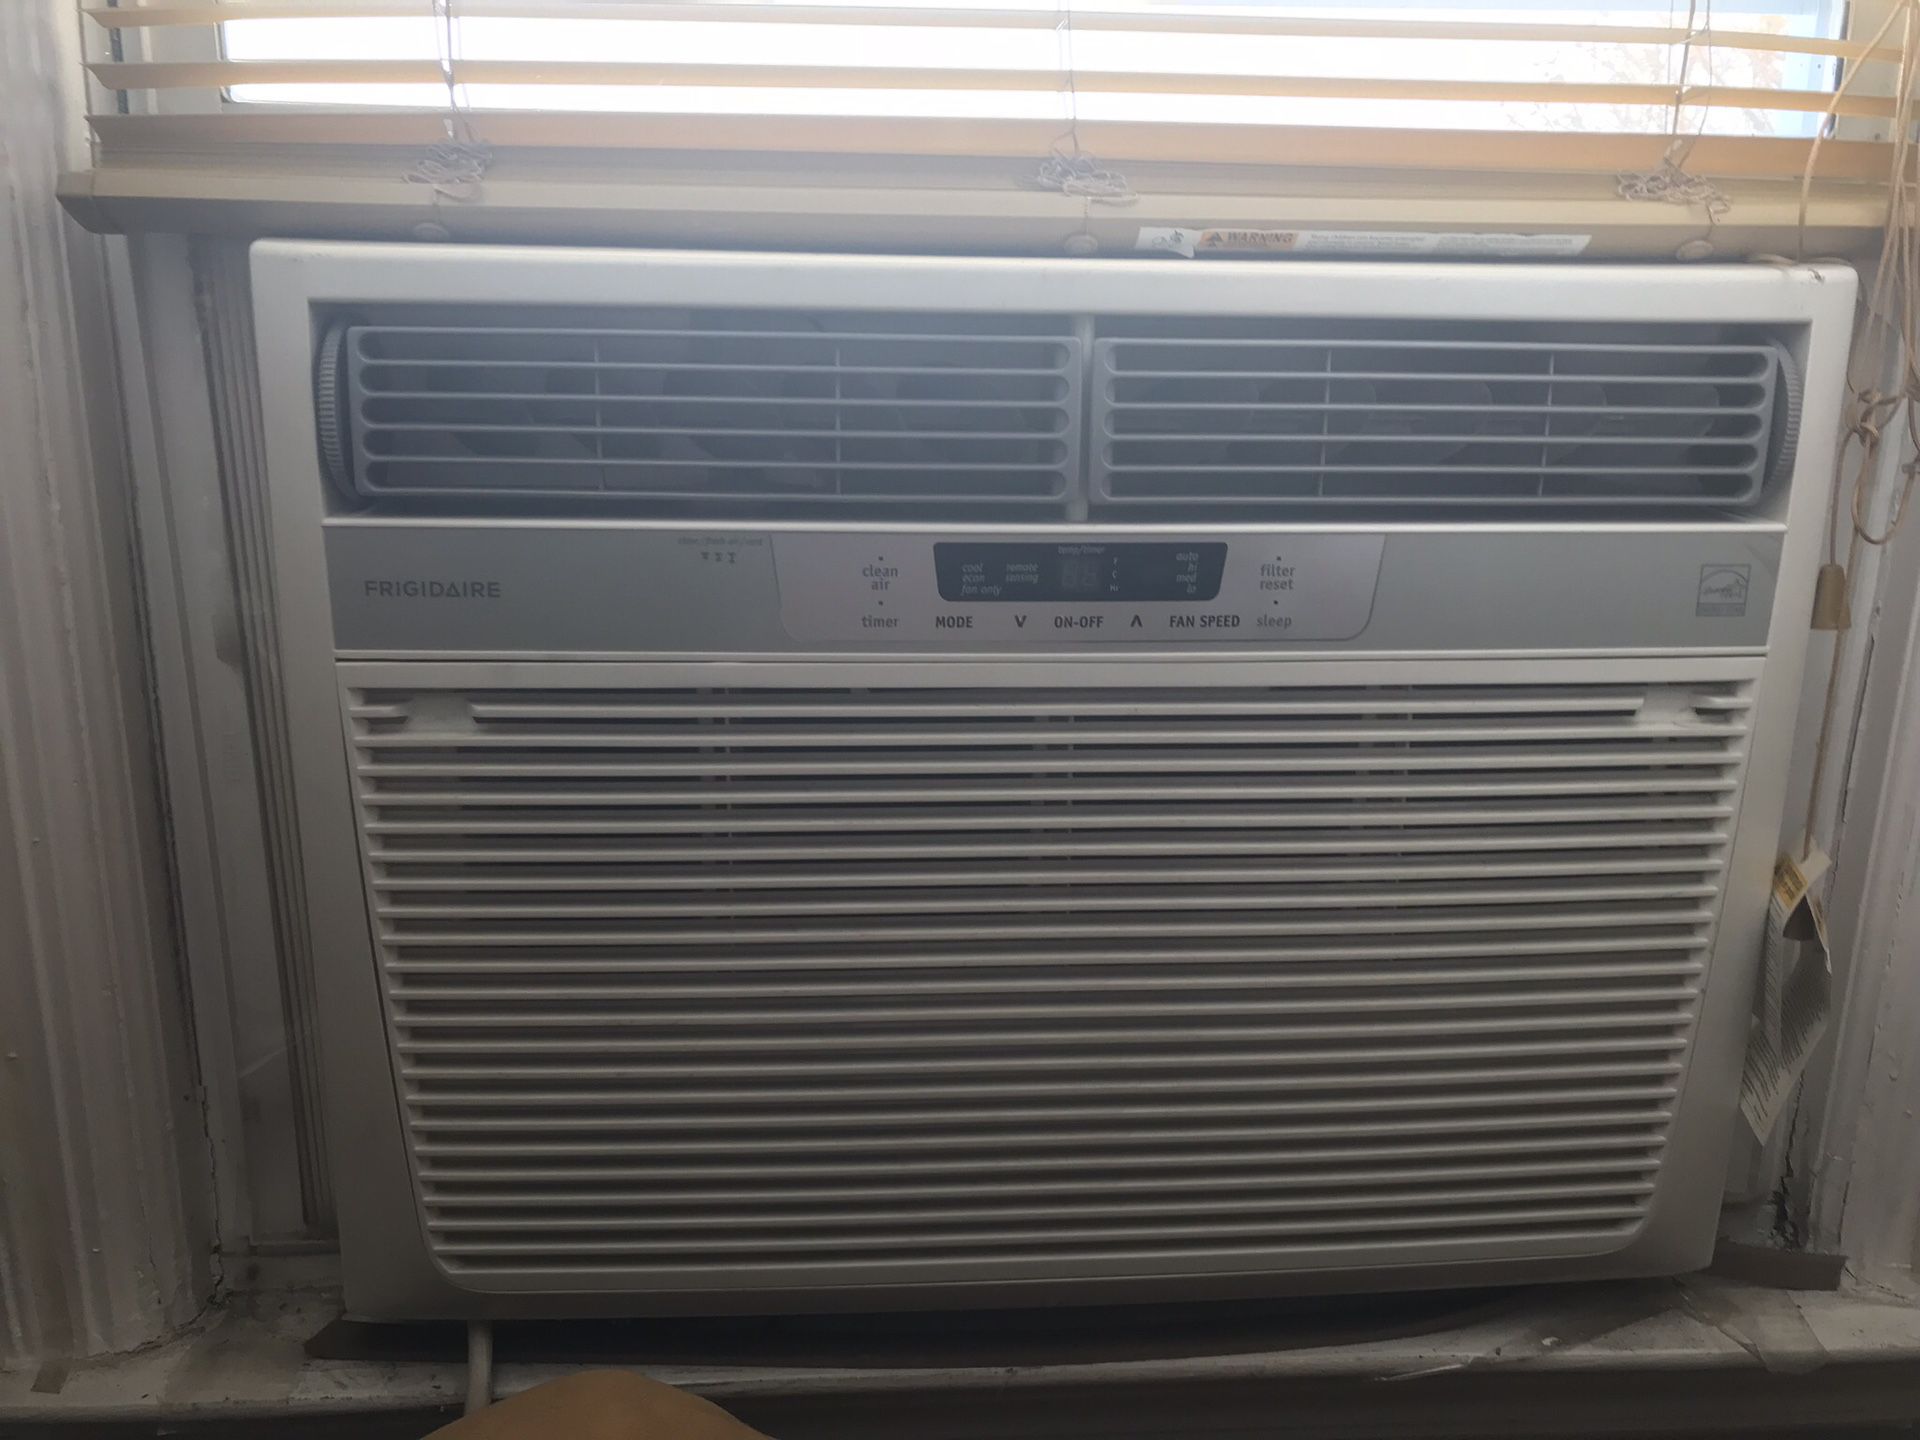 Air conditioner. Slightly used. Asking $350.00 or best offer.